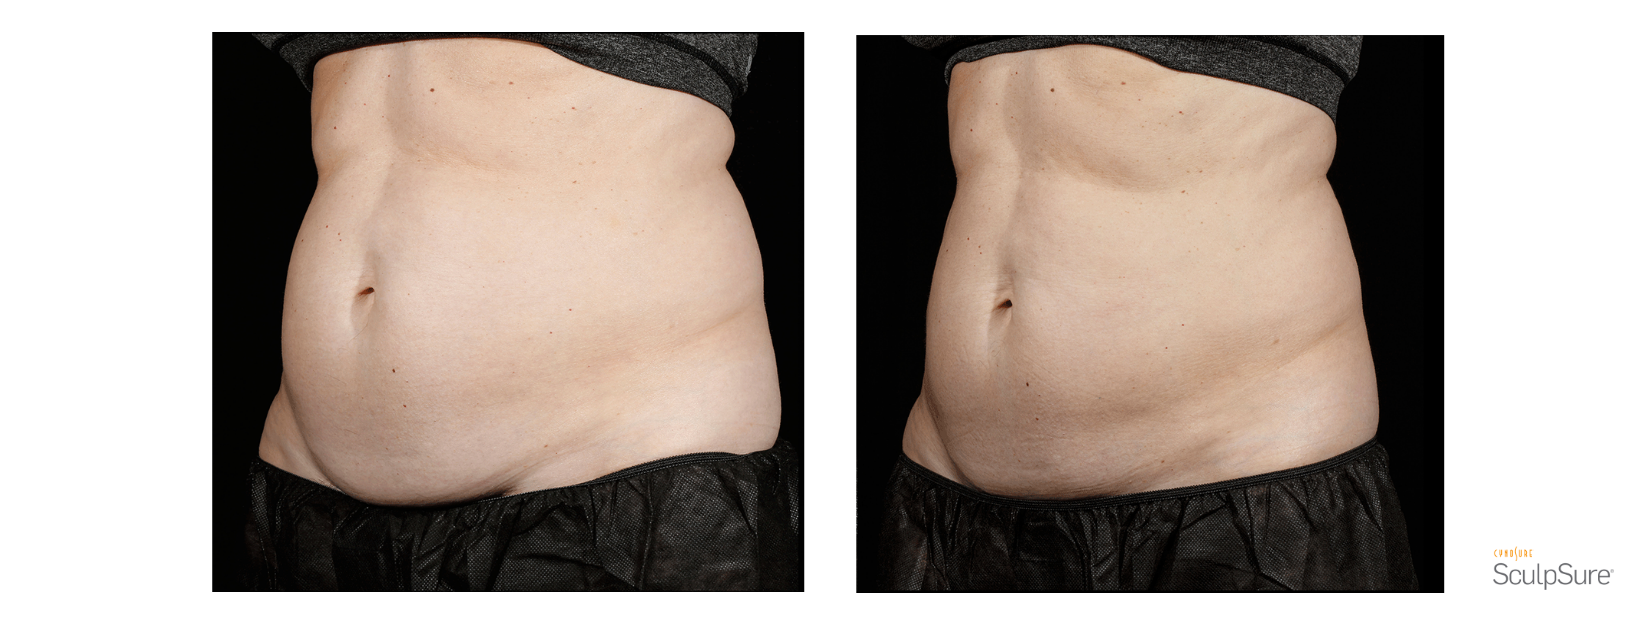 SculpSure Stomach